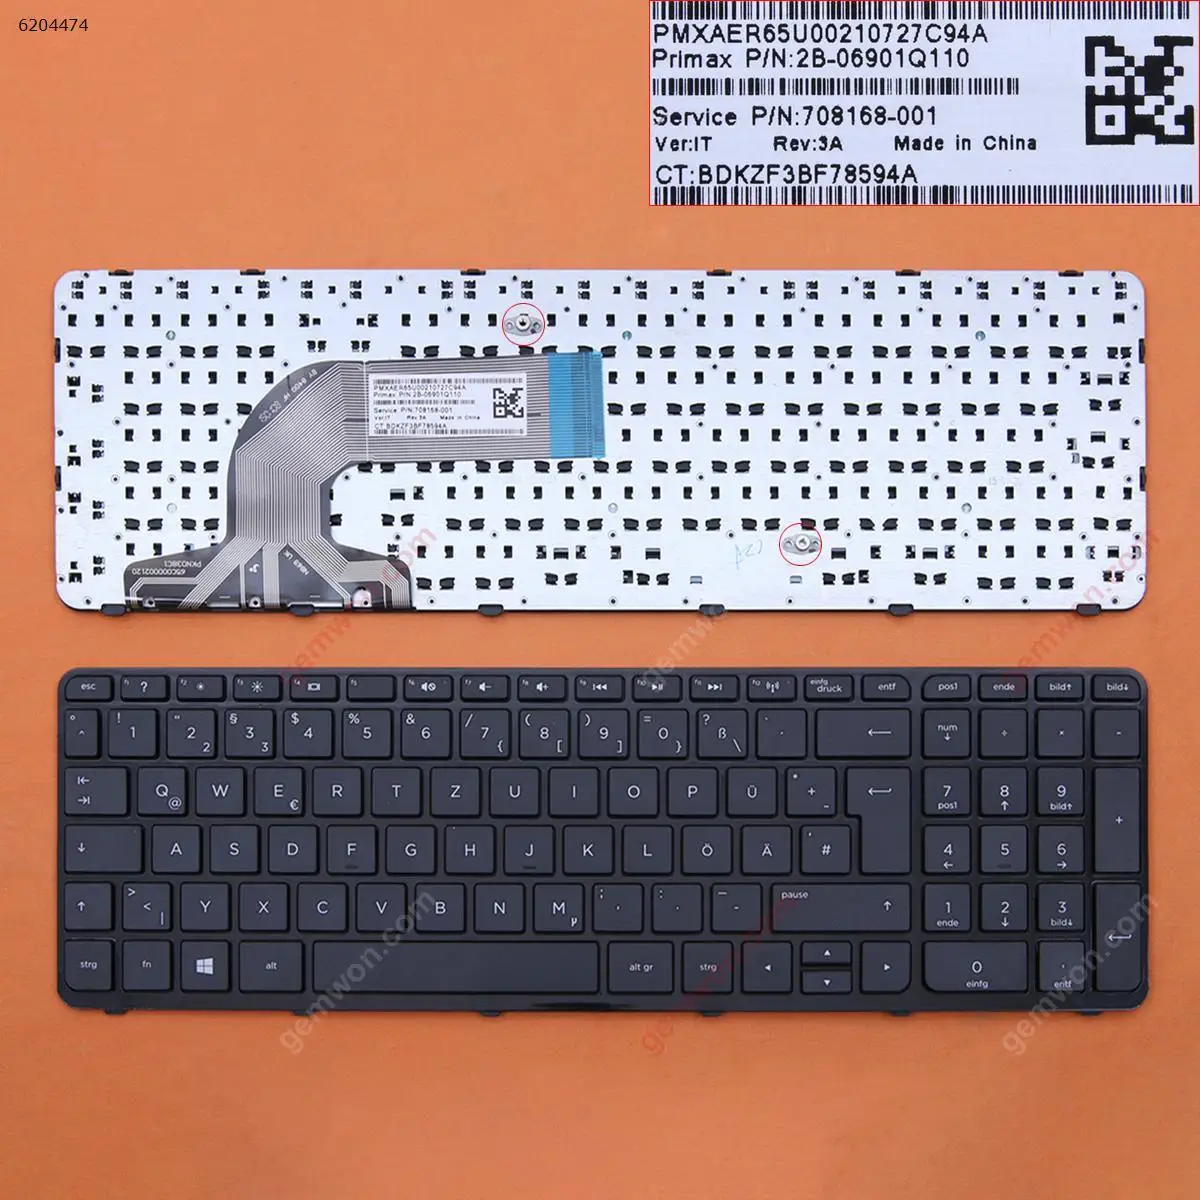 

German QWERTZ New Keyboard for HP Pavilion 15-e000 15-n000 15-g000 15-r000 Series 250 G3 255 G3 256 G3 Laptop with Frame